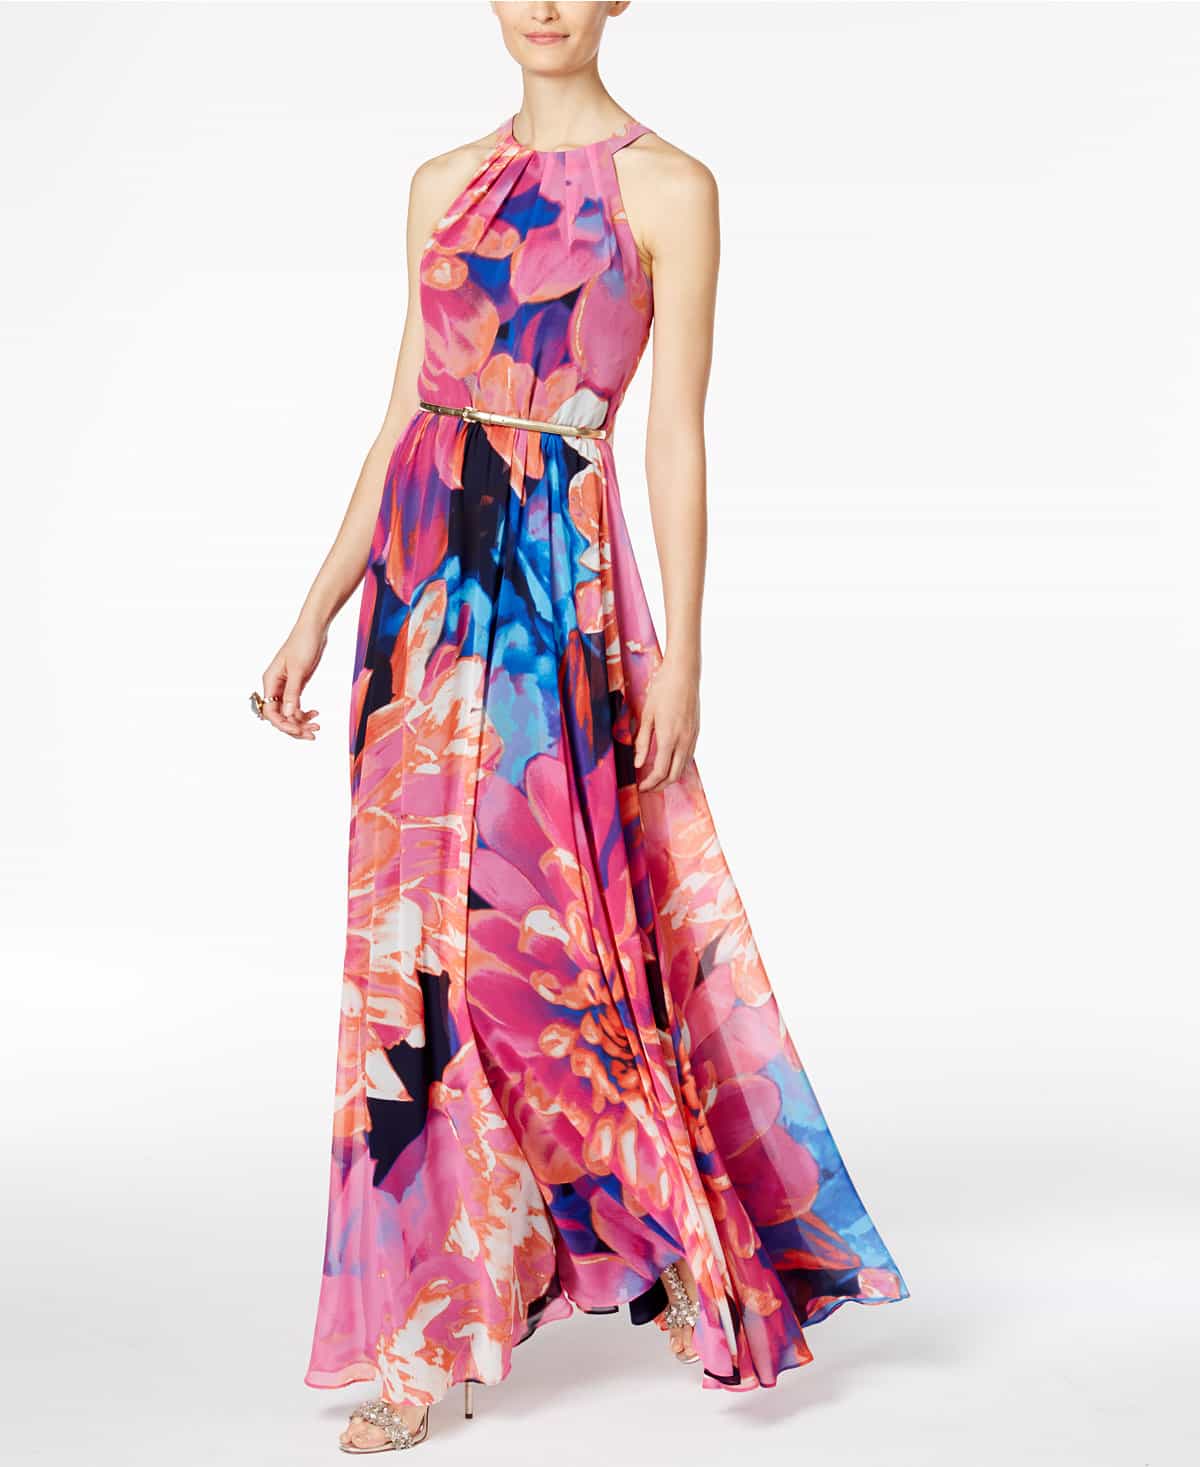 July Wedding Guest Attire Ideas: New Dresses to Wear This Month ...